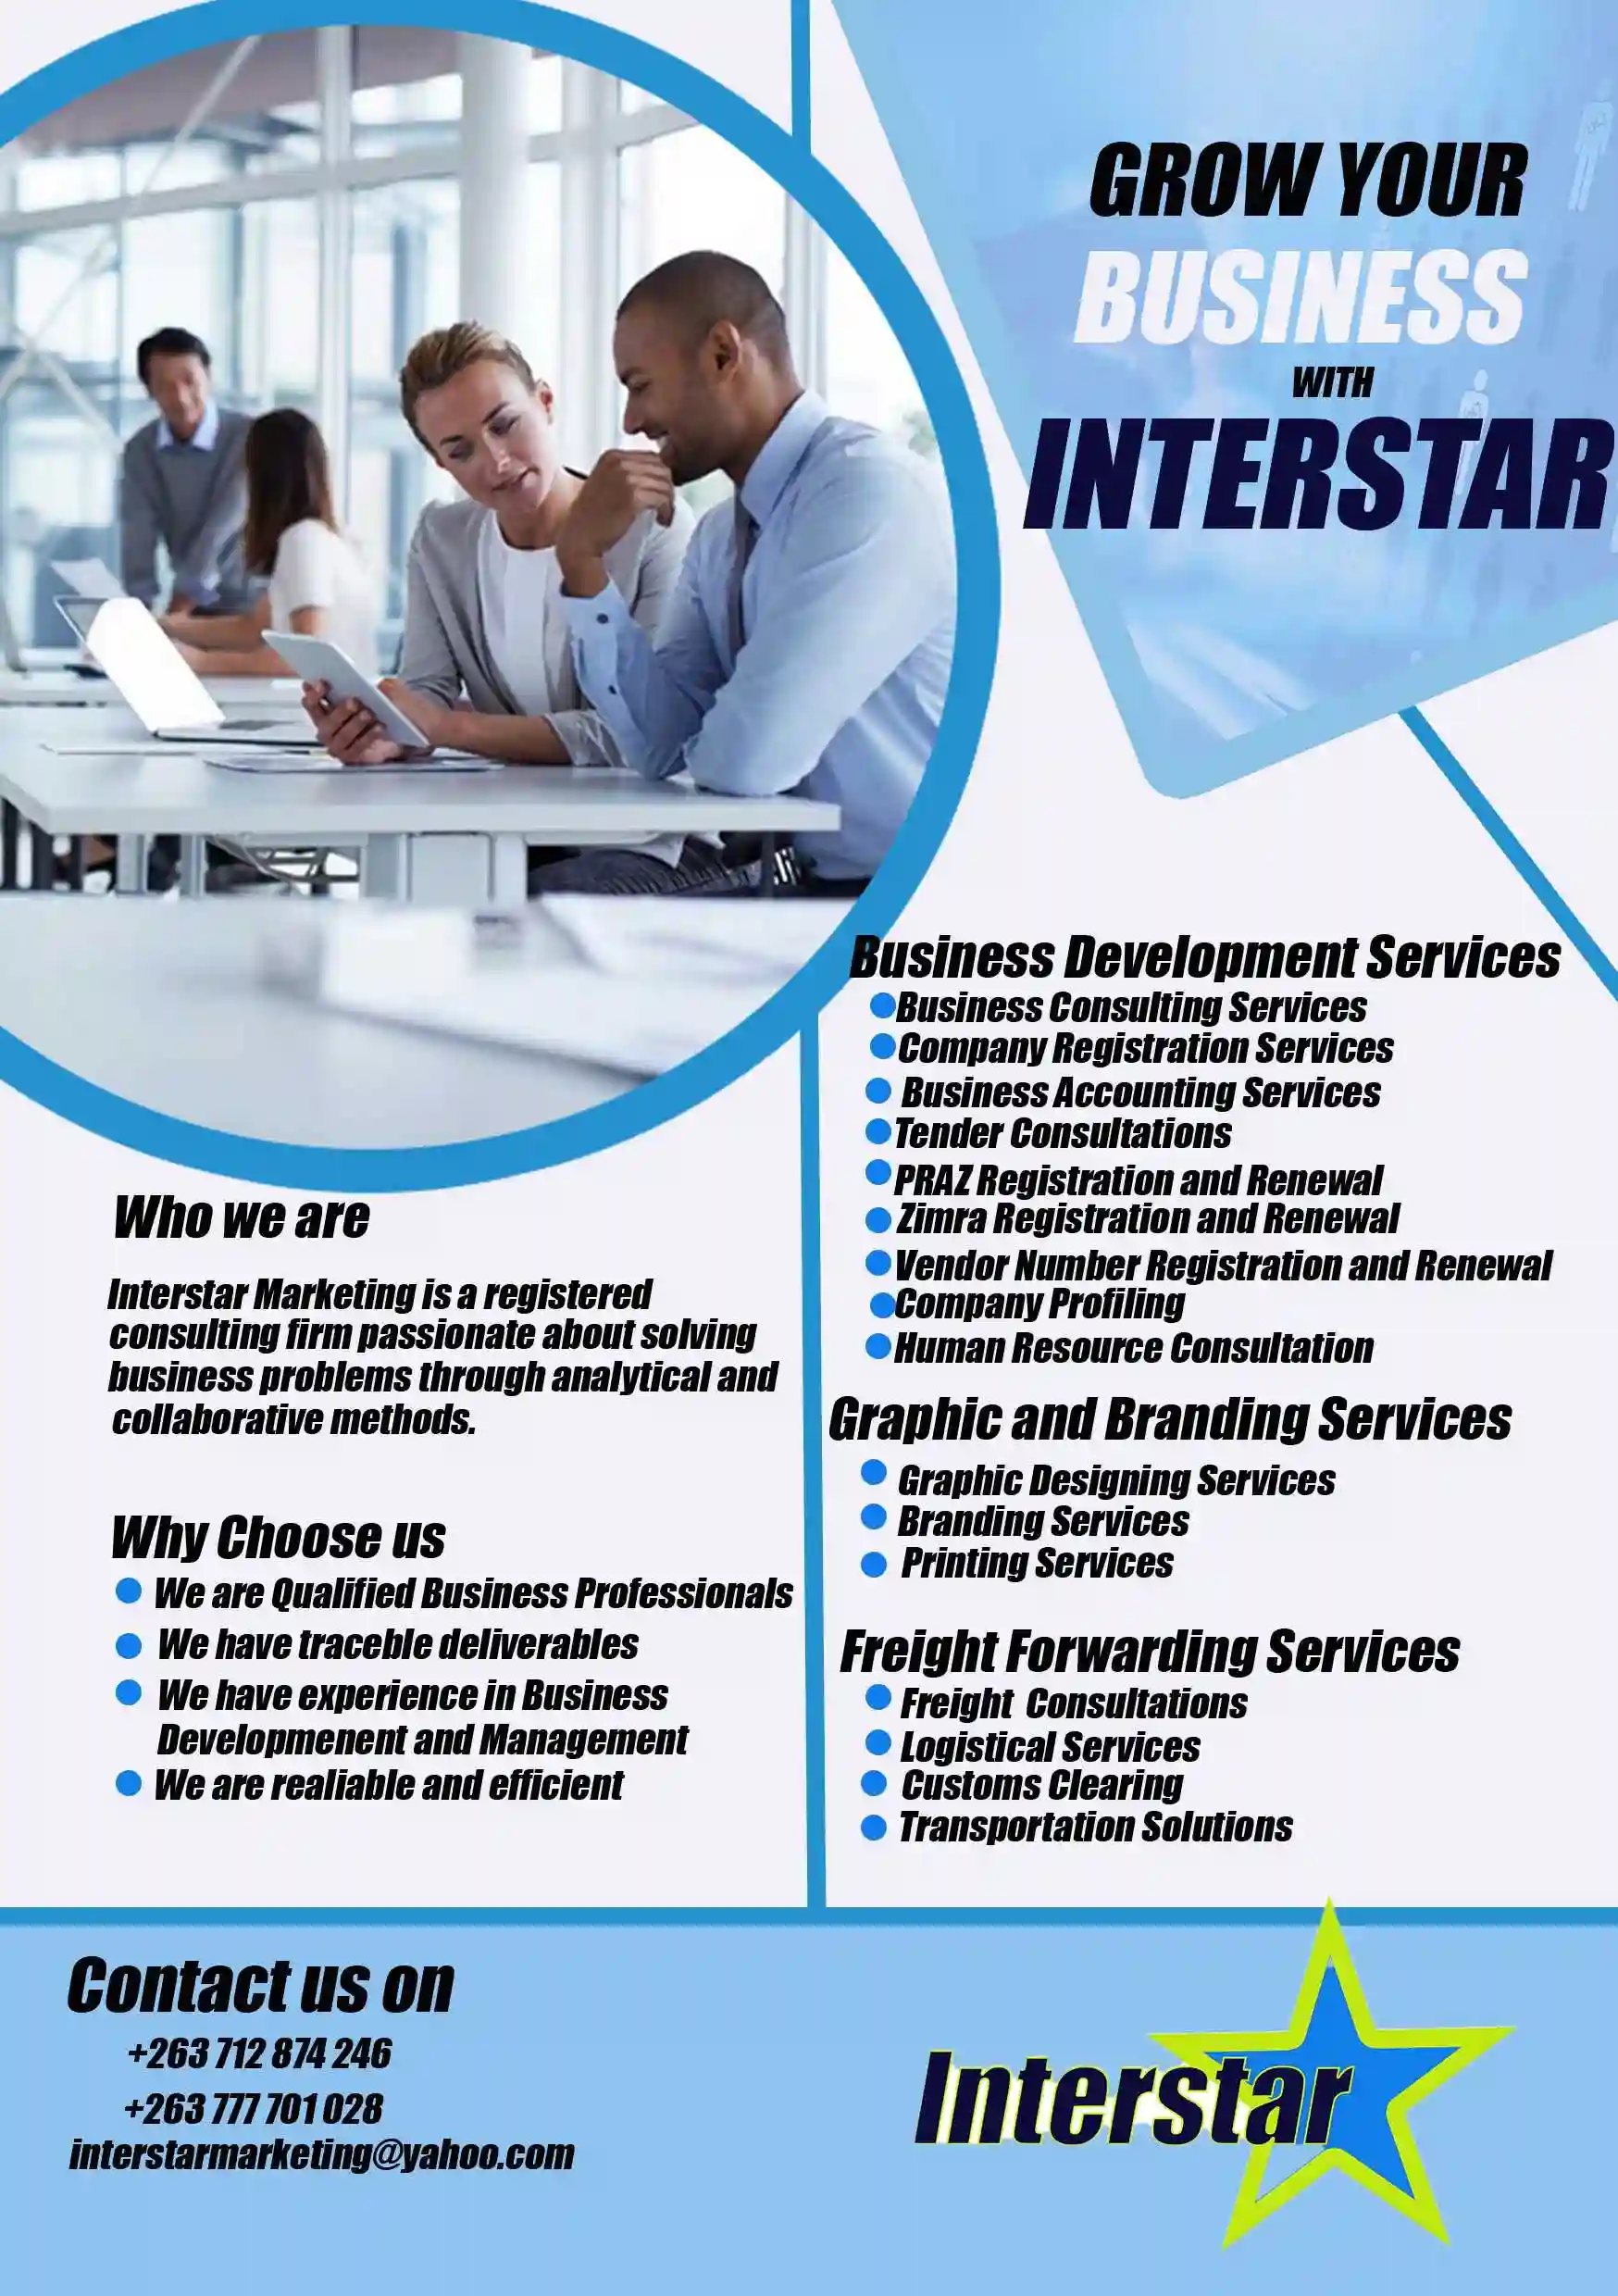 Business Development and Consulting Services